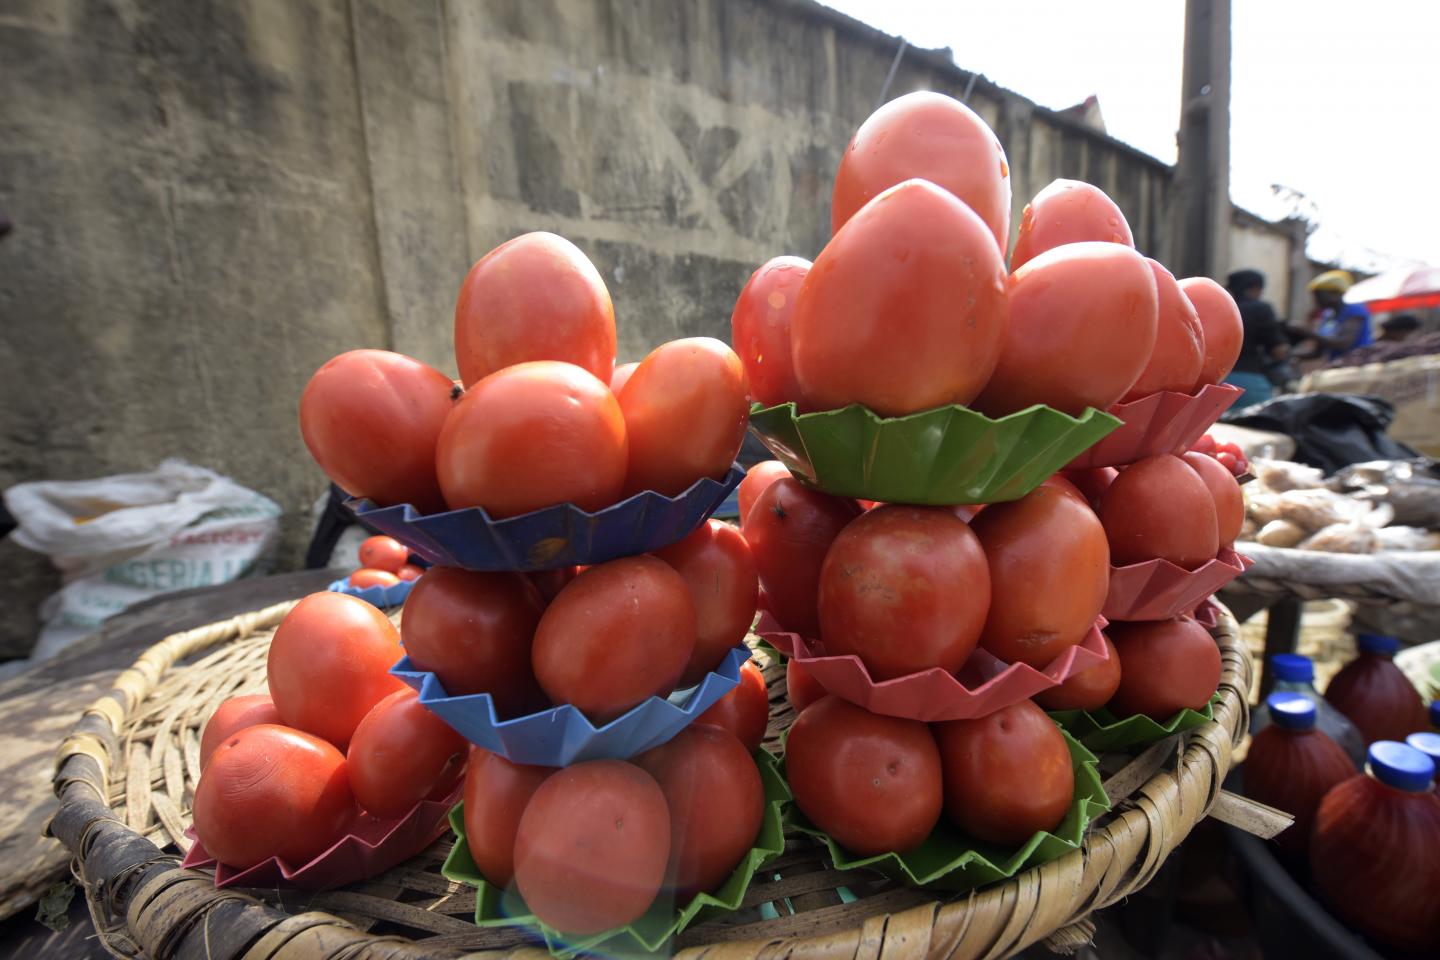 Tomatoes are displayed for sale in Lagos, Nigeria, May 25, 2015. A tomato shortage caused by a pest has seen prices skyrocket in Nigeria, but a solution may be at hand. 